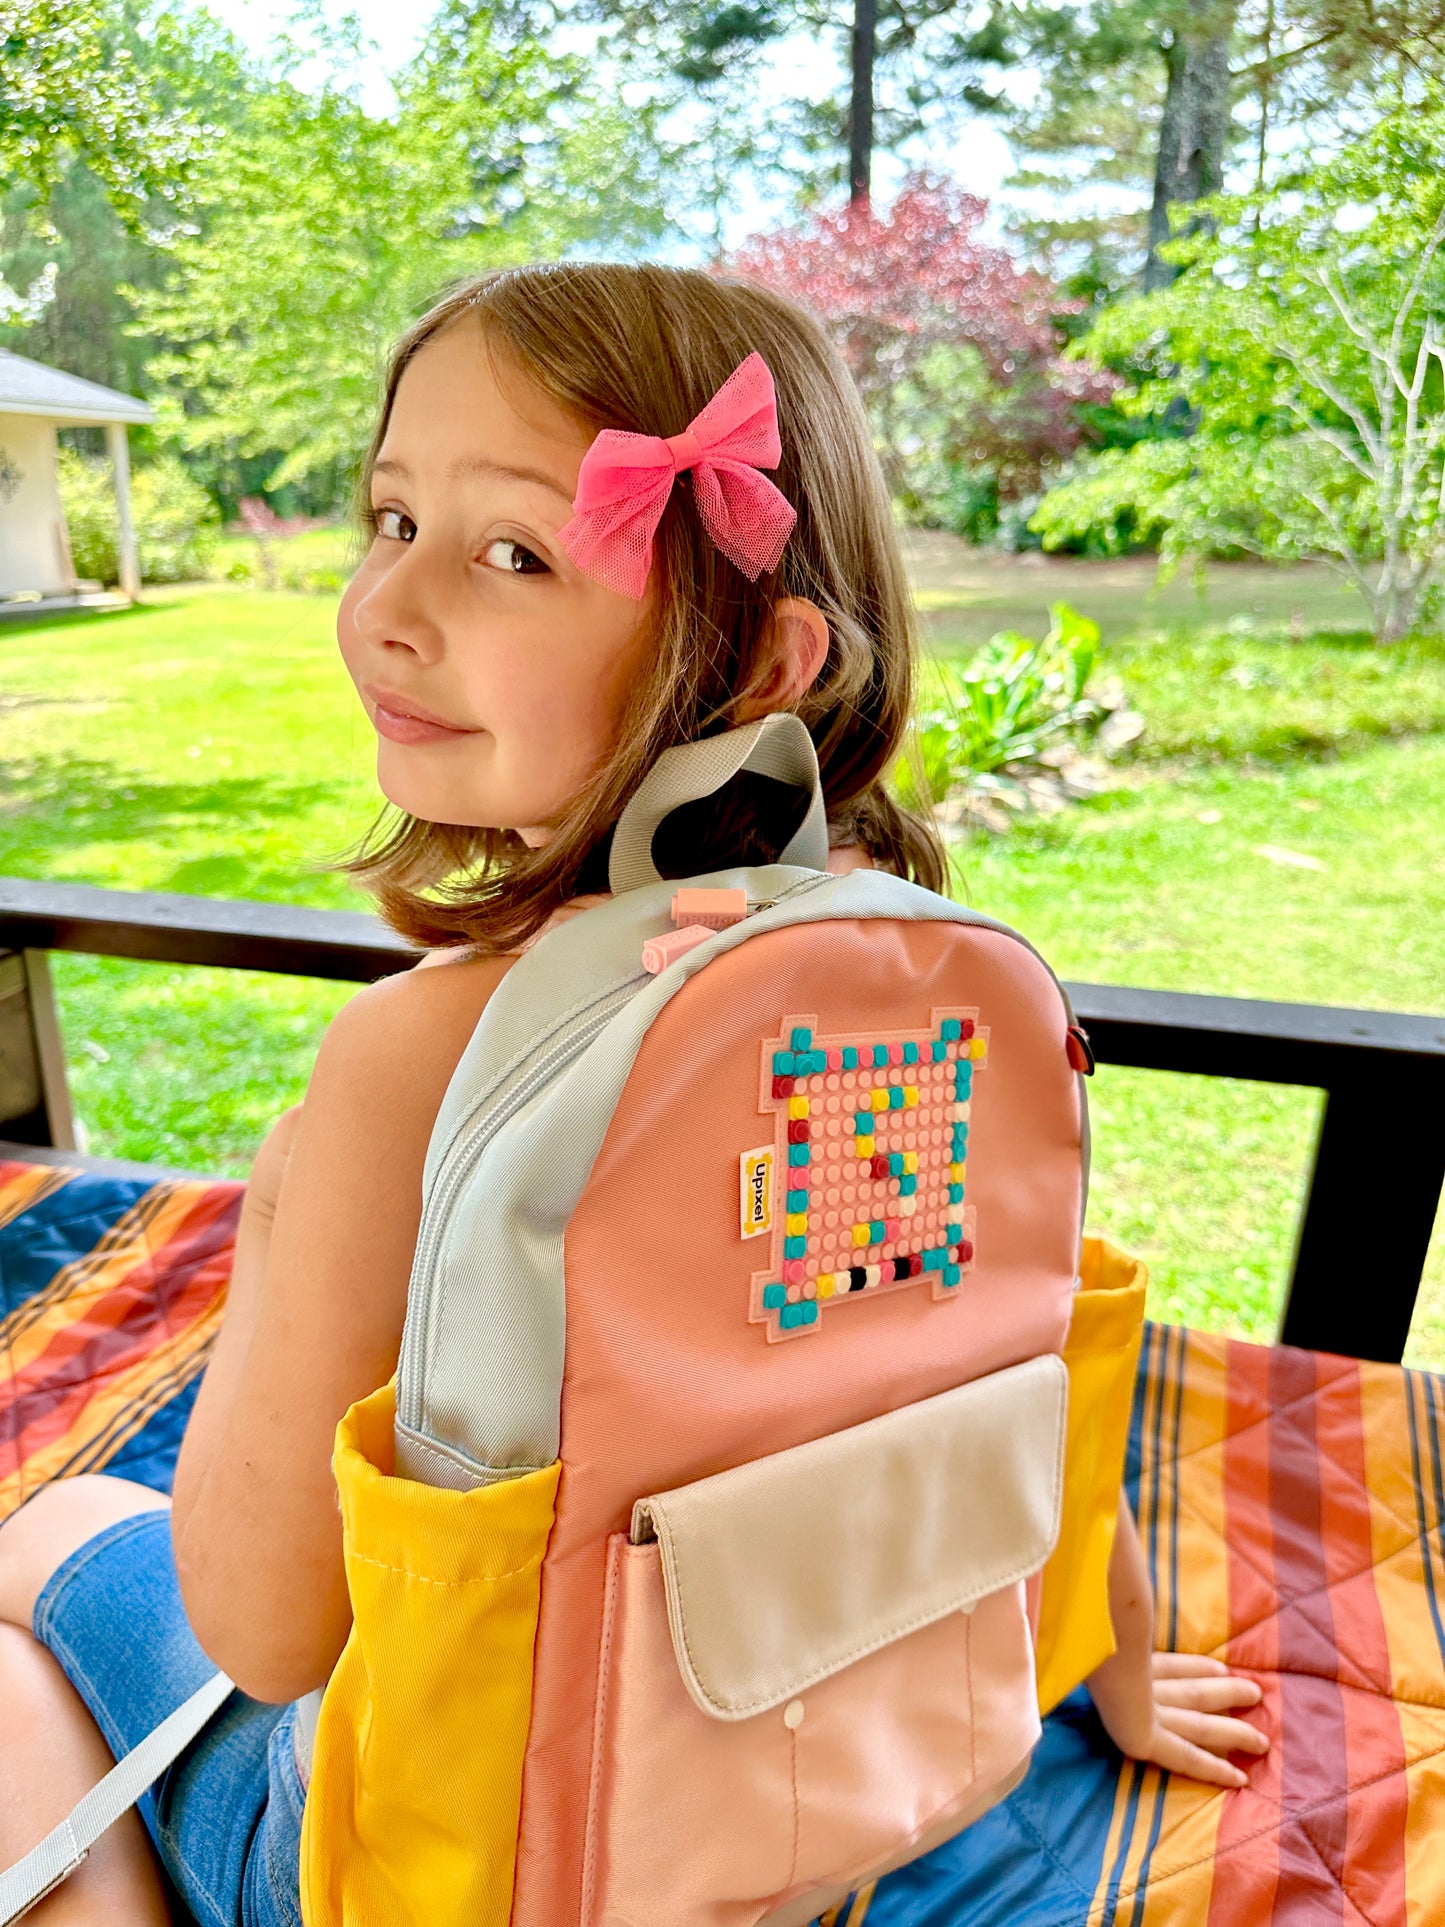 UPIXEL ACE DIY Patterns Kid's Backpack for Outdoor Travel for Age 3-8